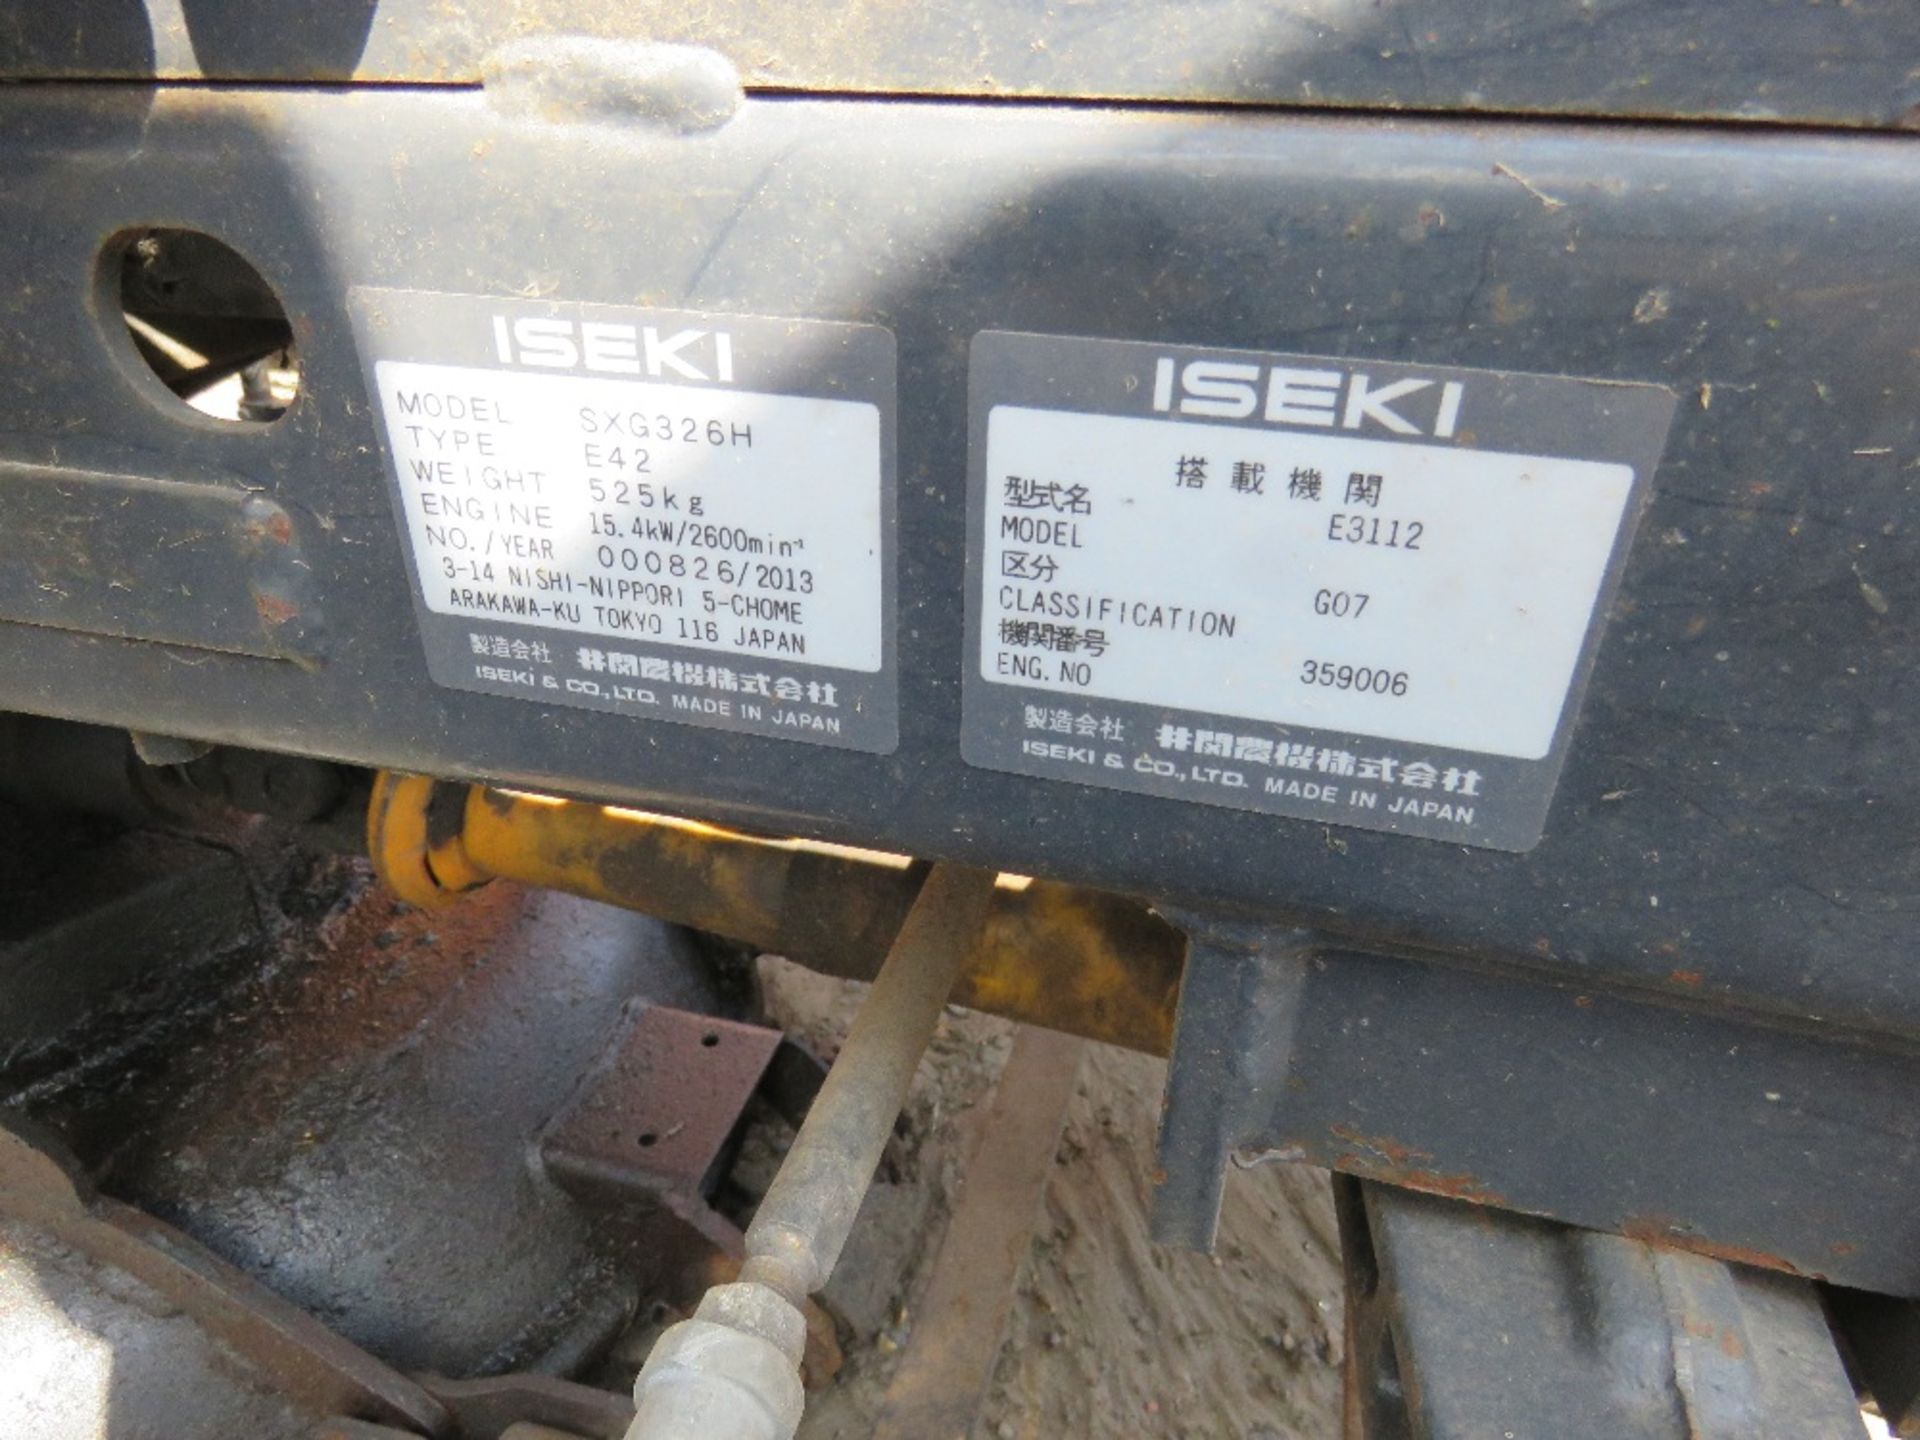 ISEKI DIESEL SXG PROFESSIONAL RIDE ON MOWER. BRIEFLY TESTED AND WAS SEEN TO RUN AND DRIVE BUT DECK N - Image 10 of 10